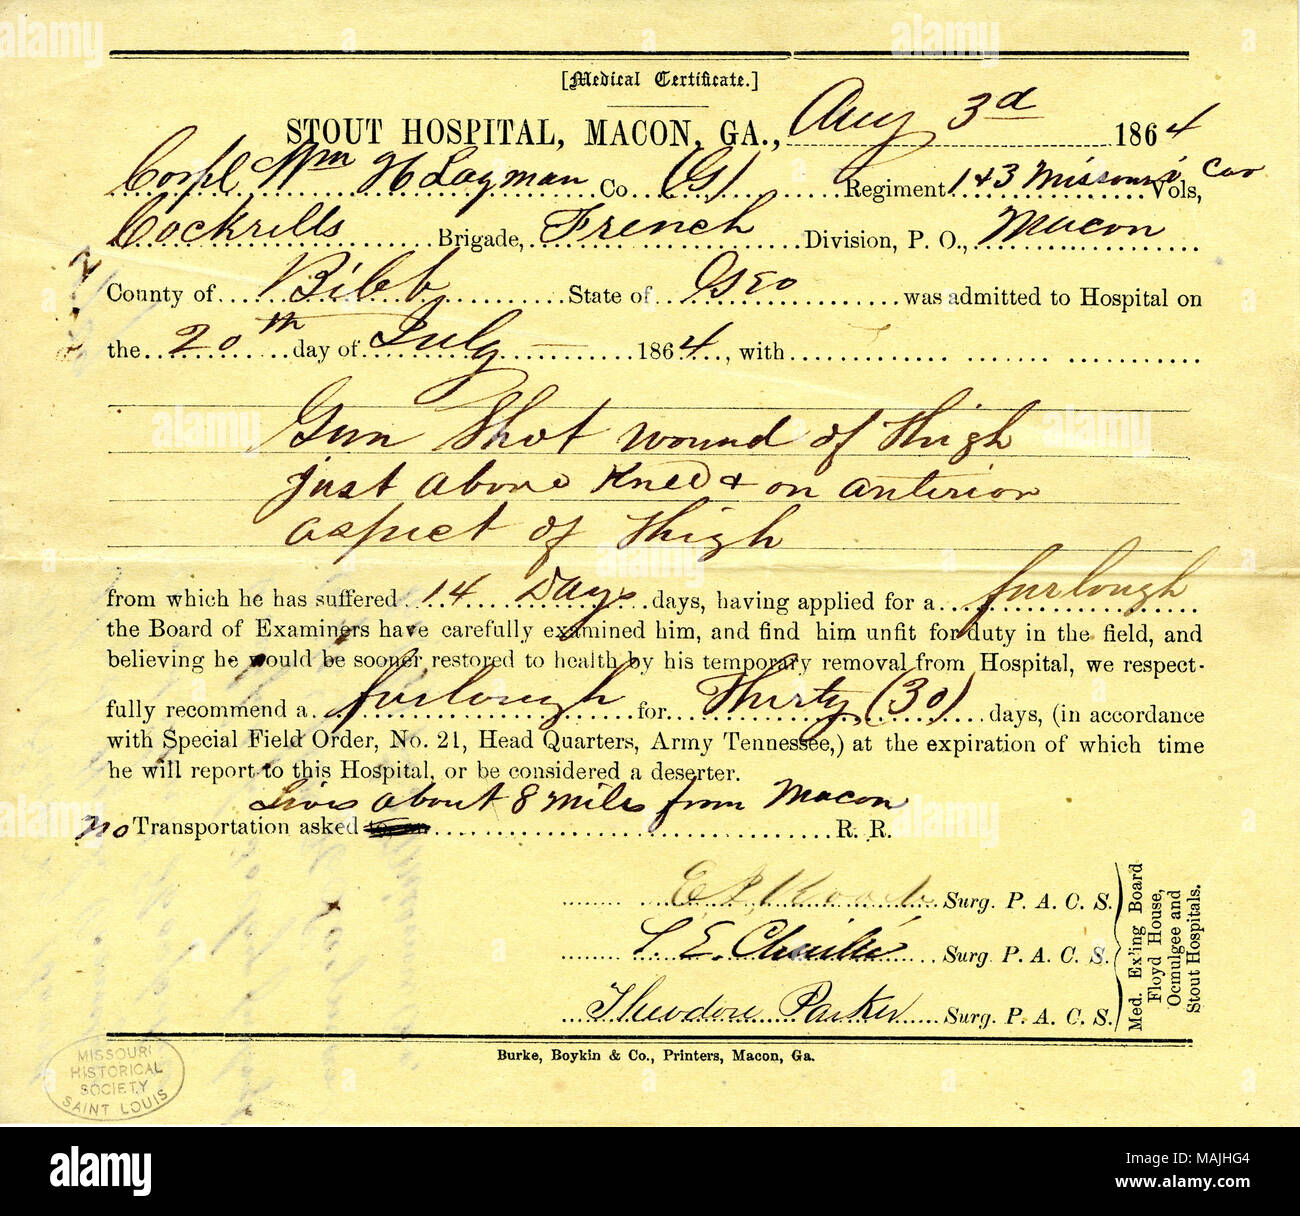 States that Lagman was admitted to Stout Hospital at Macon, Georgia, on July 20, 1864, with a gunshot wound on his thigh. Title: Medical certificate of William H. Lagman, August 3, 1864  . 3 August 1864. Parker, Theodore Stock Photo